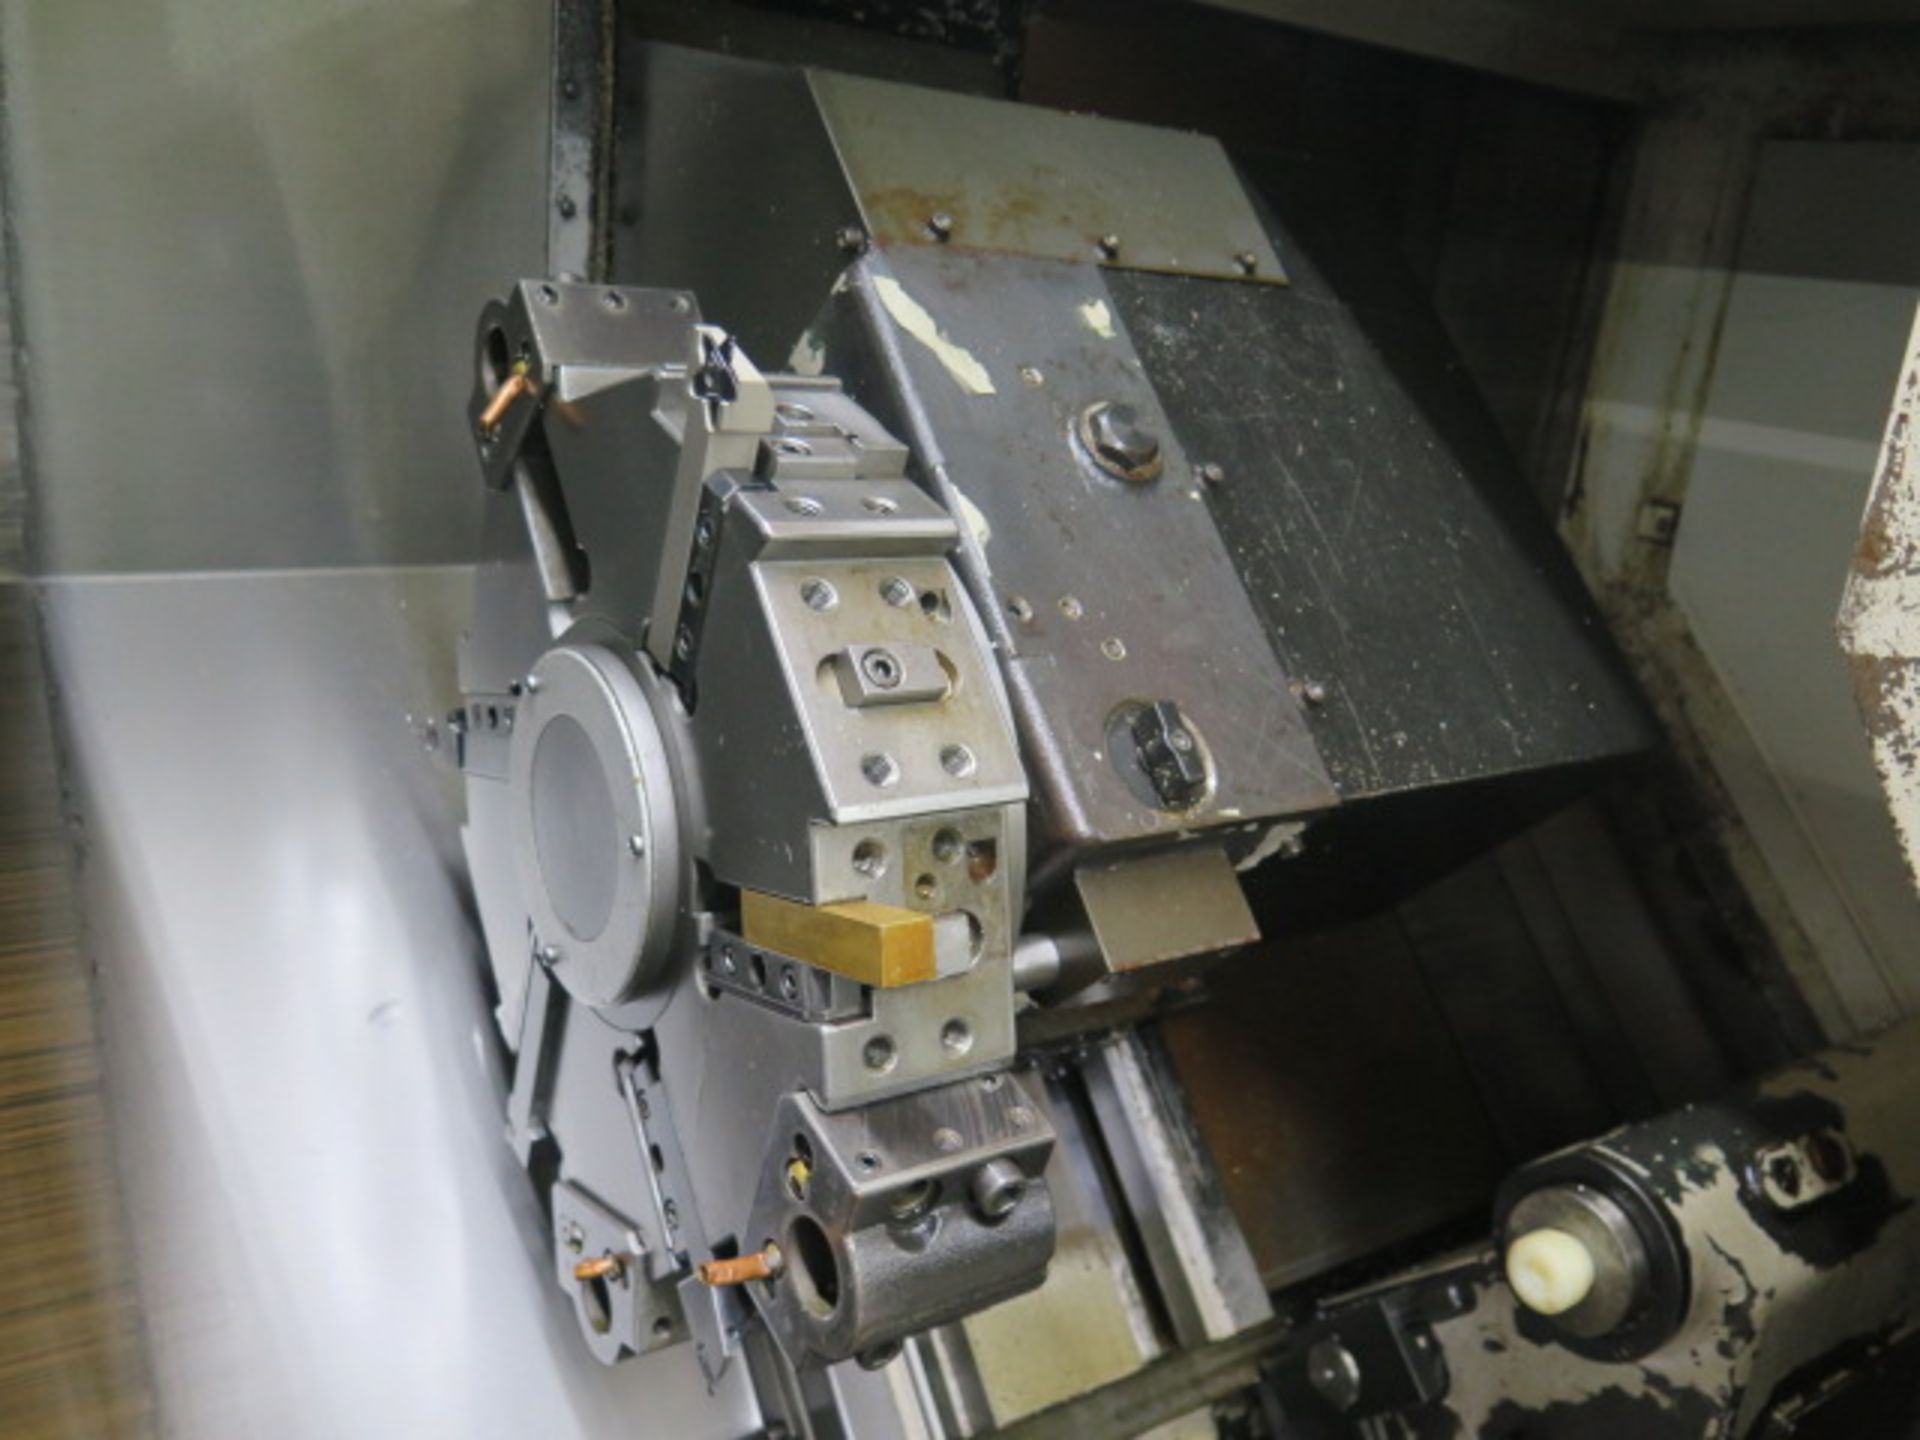 Mori Seiki SL-15 CNC Turning Center s/n 1528 w/ Fanuc MF-T4 Controls, 12-Station Turret, SOLD AS IS - Image 6 of 15